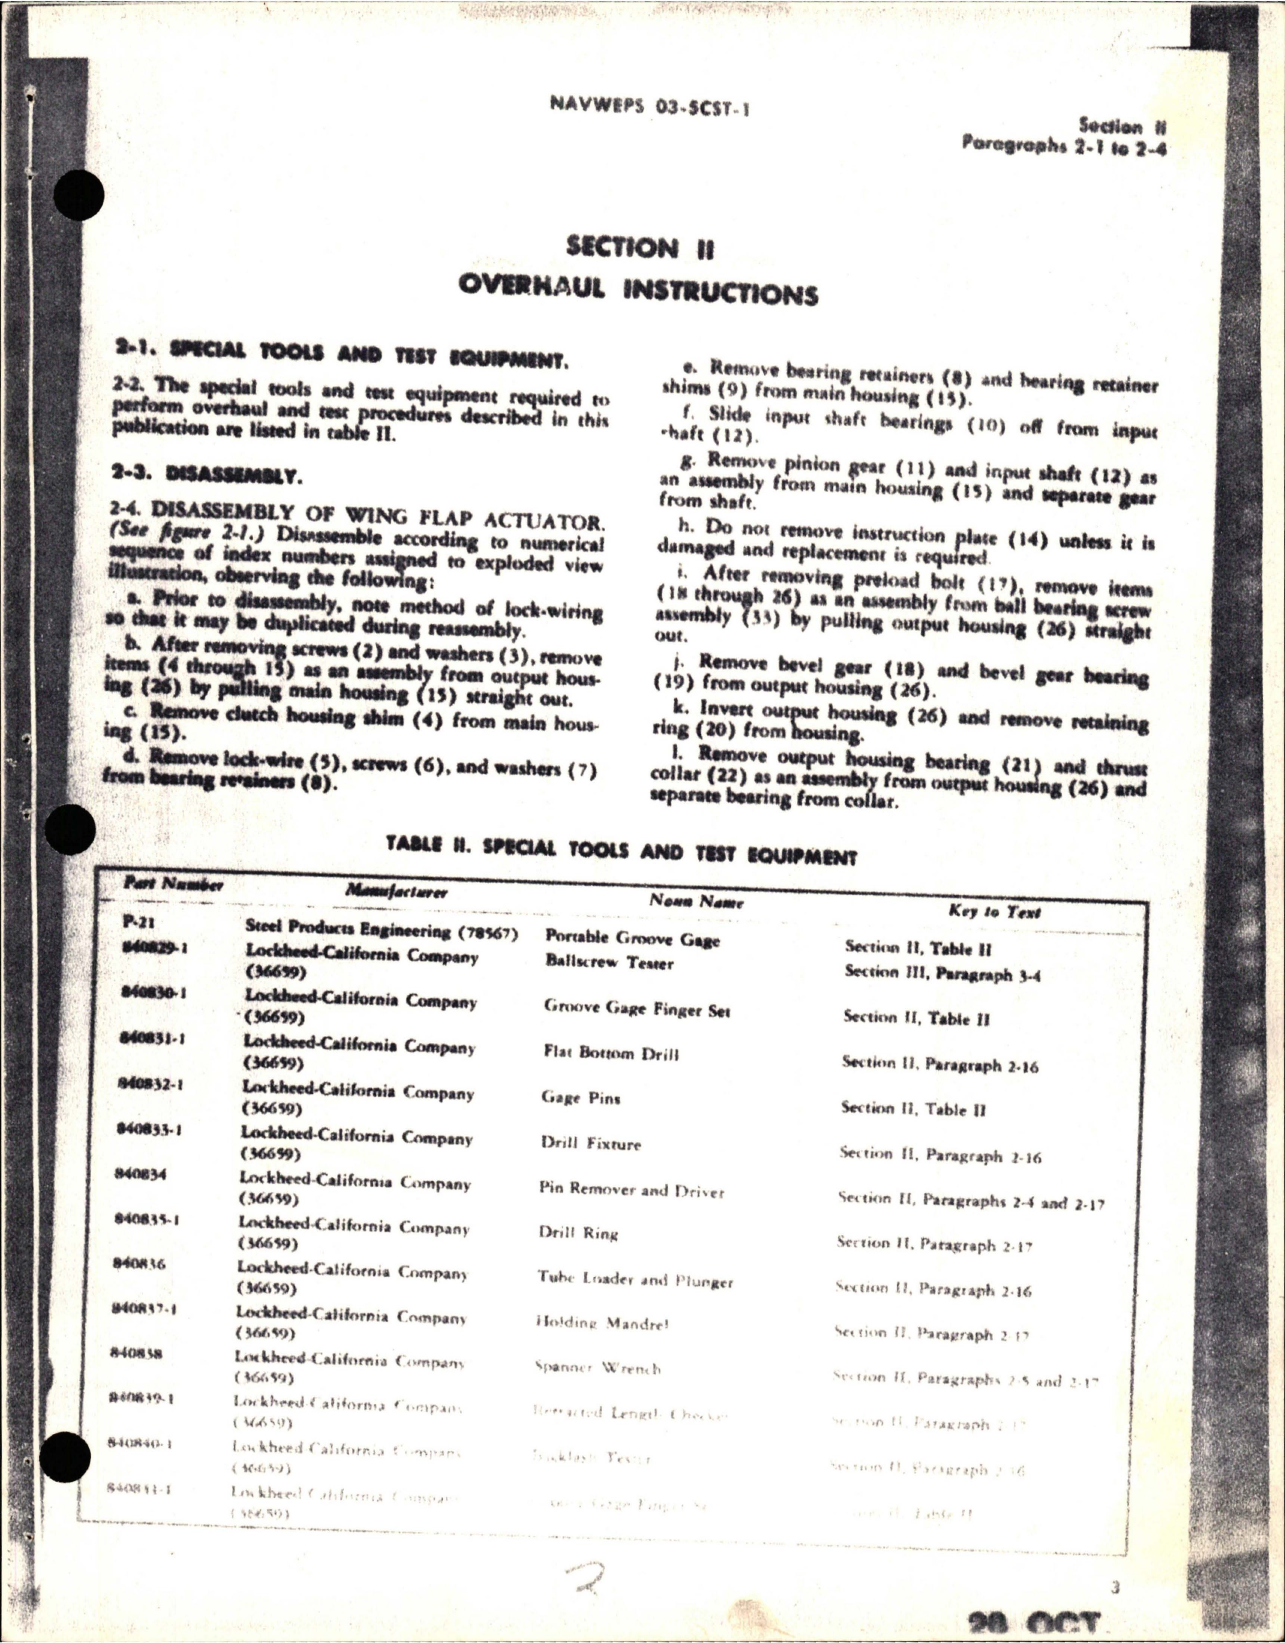 Sample page 5 from AirCorps Library document: Maintenance Instructions for Wing Flap Actuator - Parts SPL5588-1 and SPL5568-3 